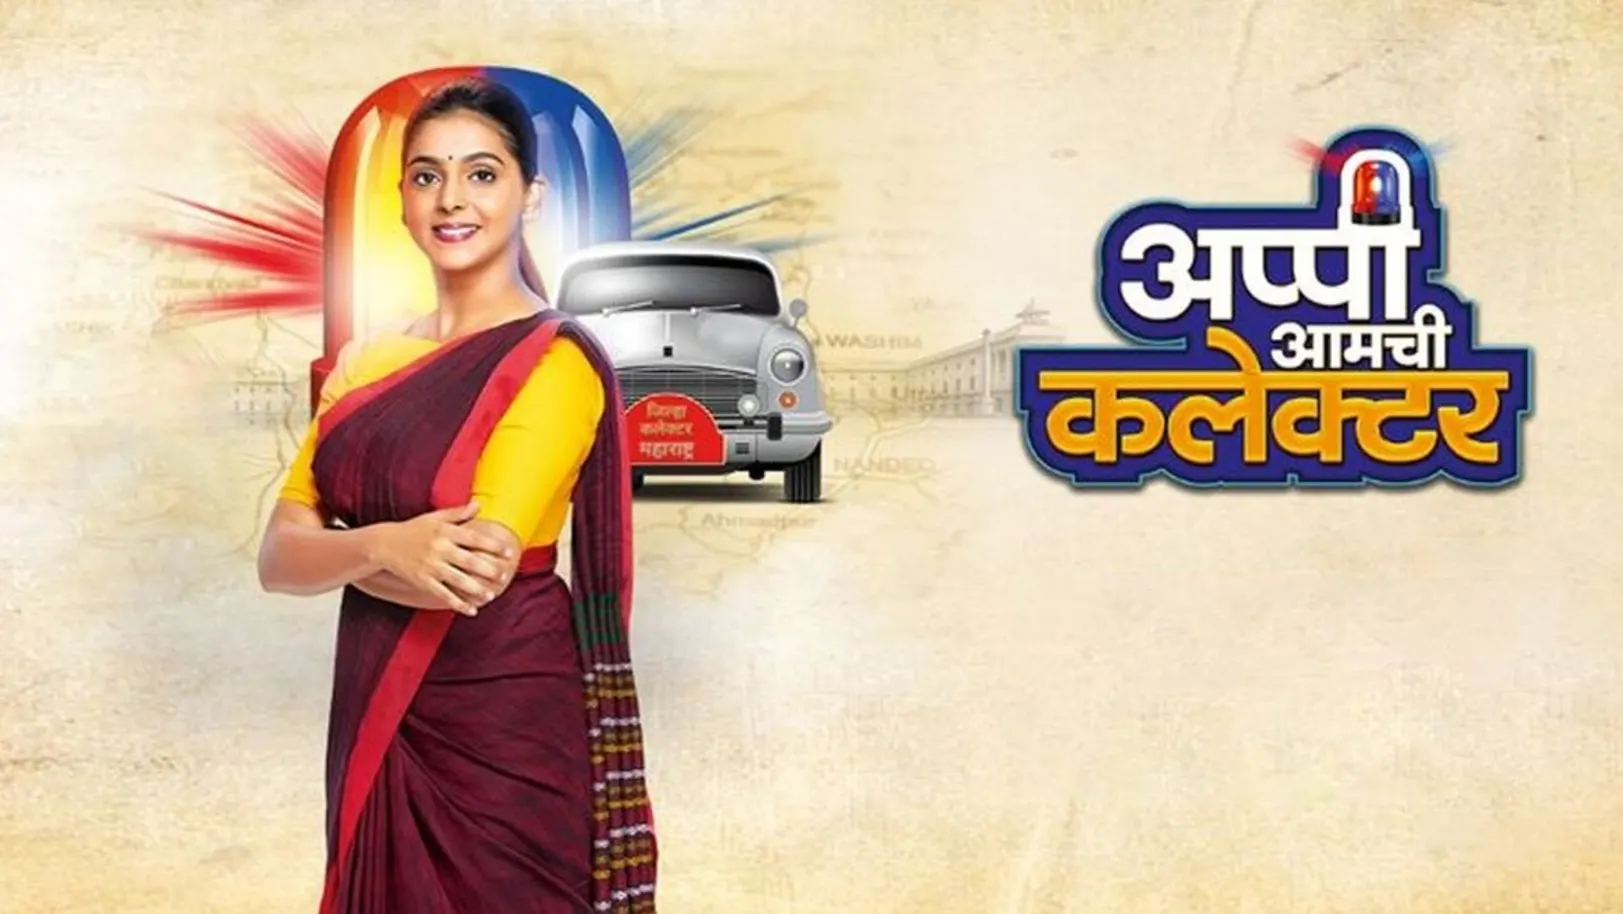 Aappi Amchi Collector Streaming Now On Zee Marathi USA